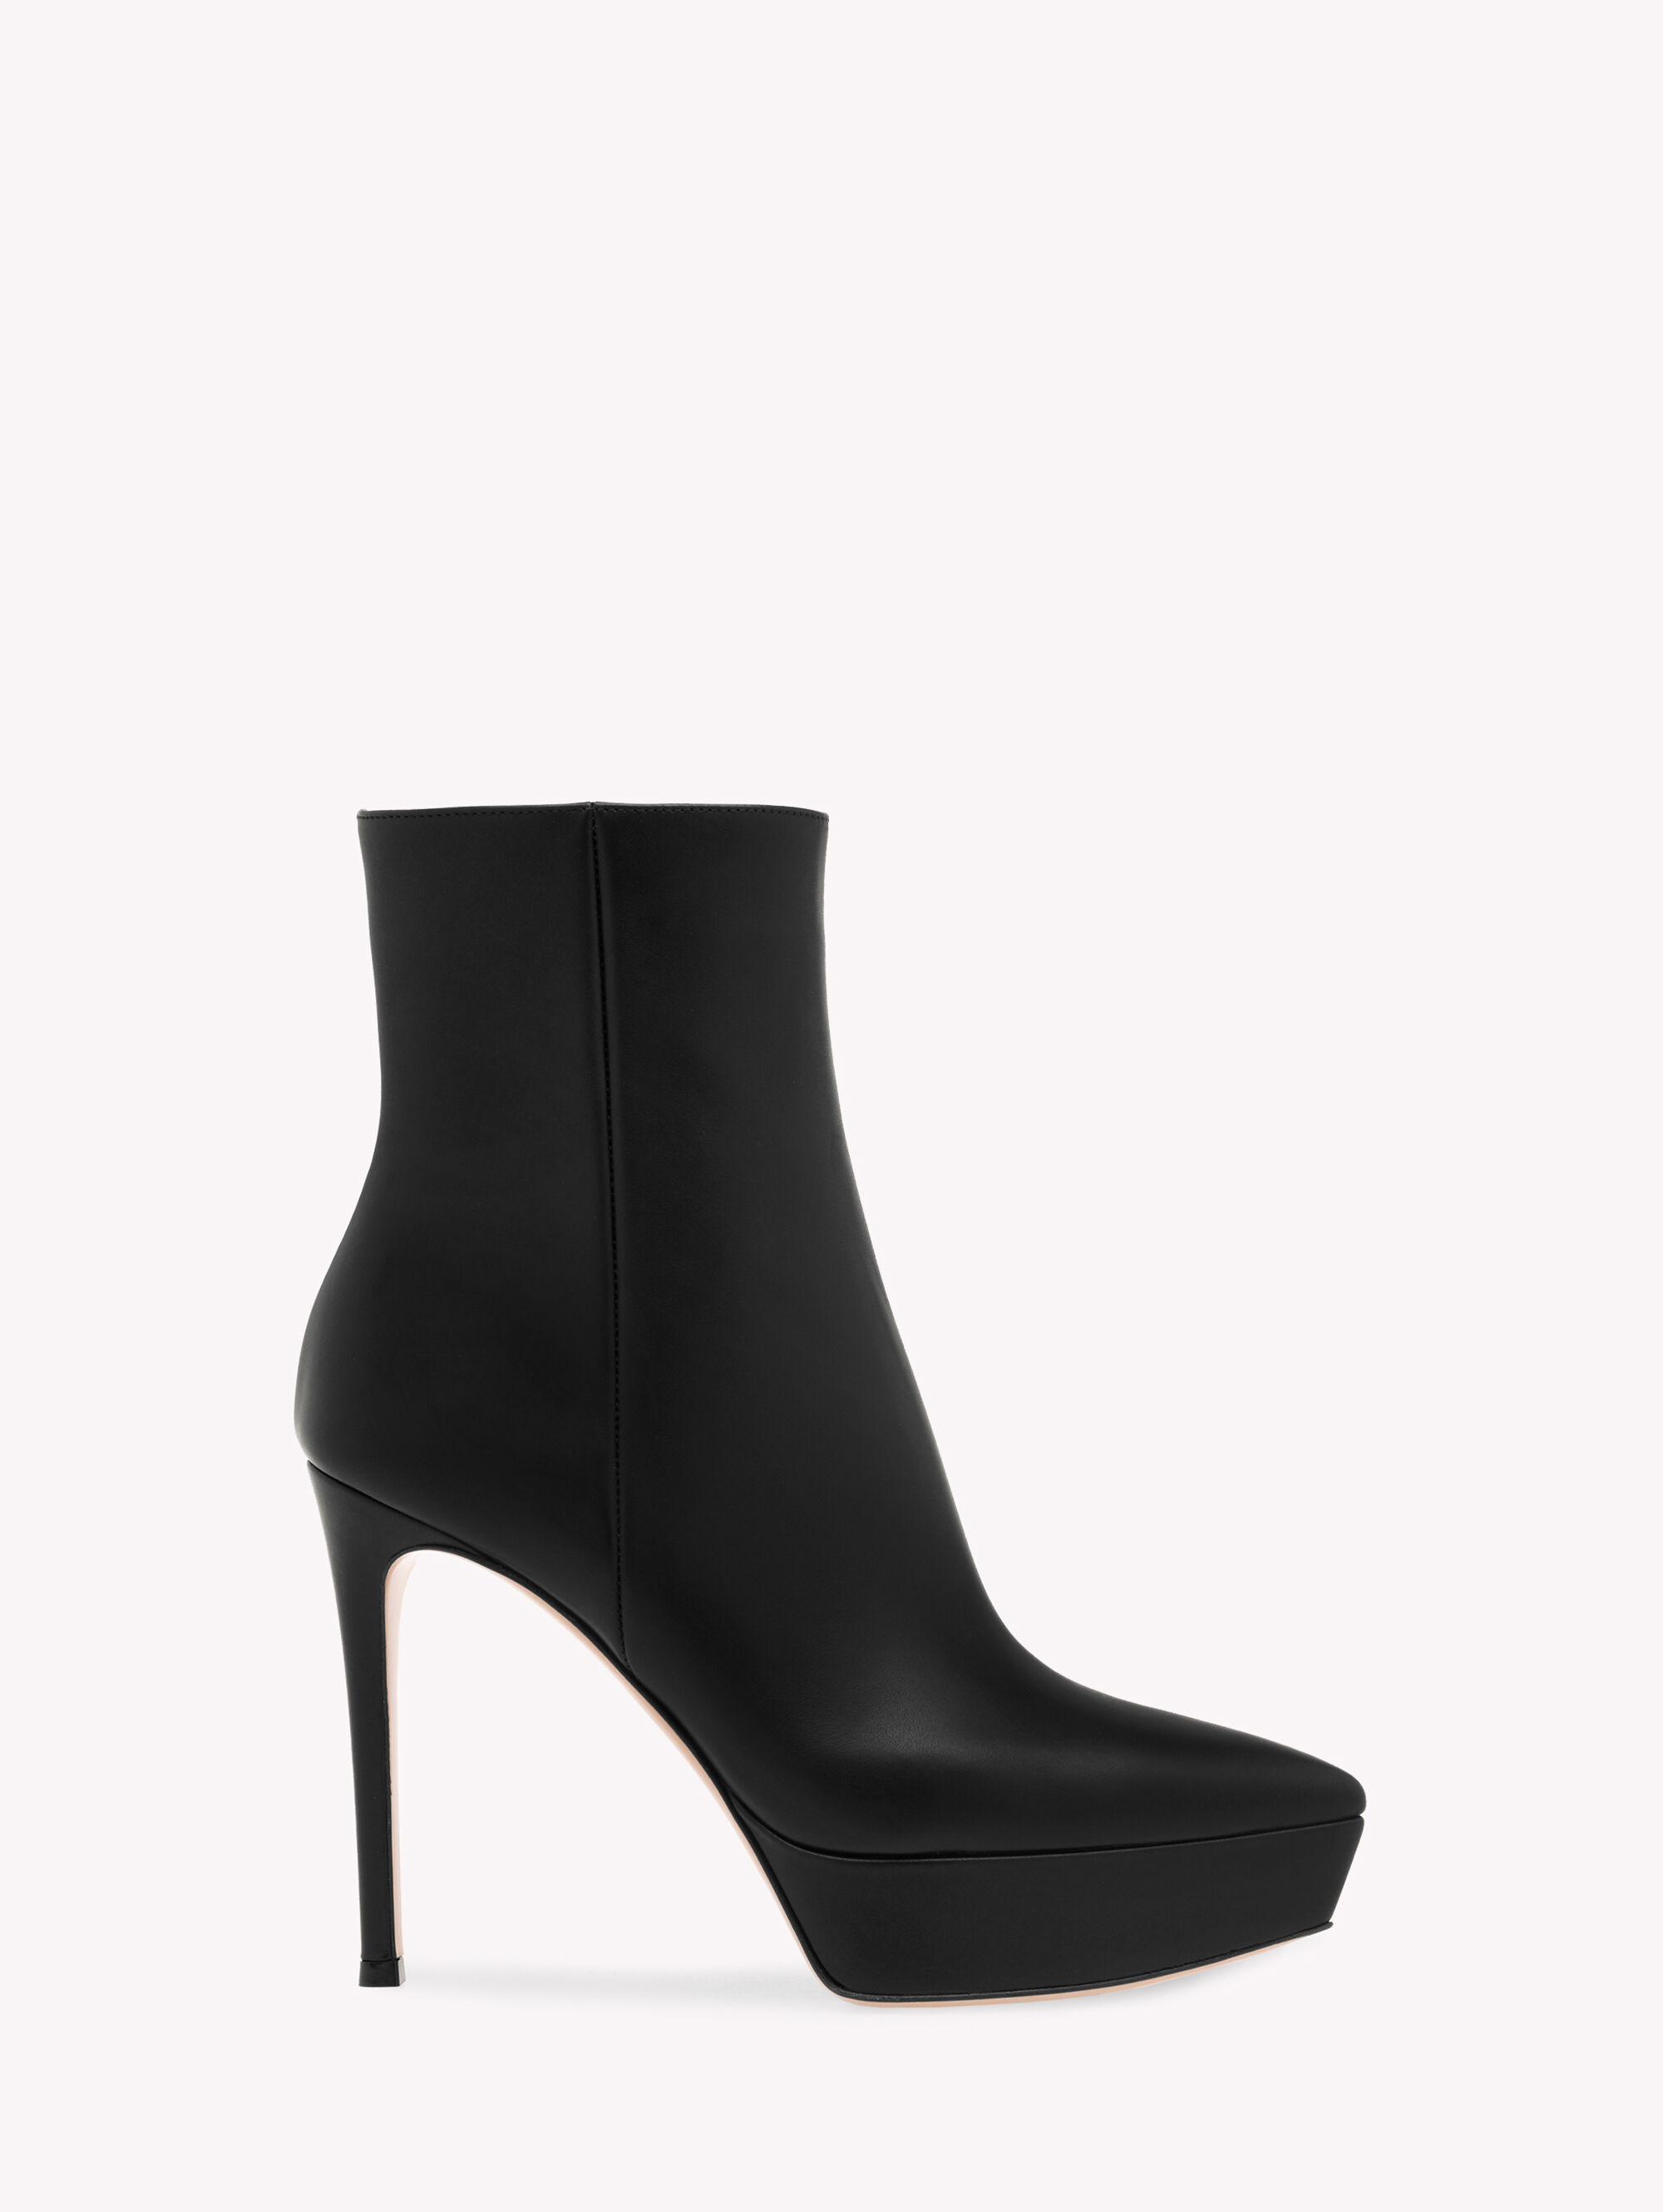 Ankle Boots for Women DASHA BOOTIE | Gianvito Rossi